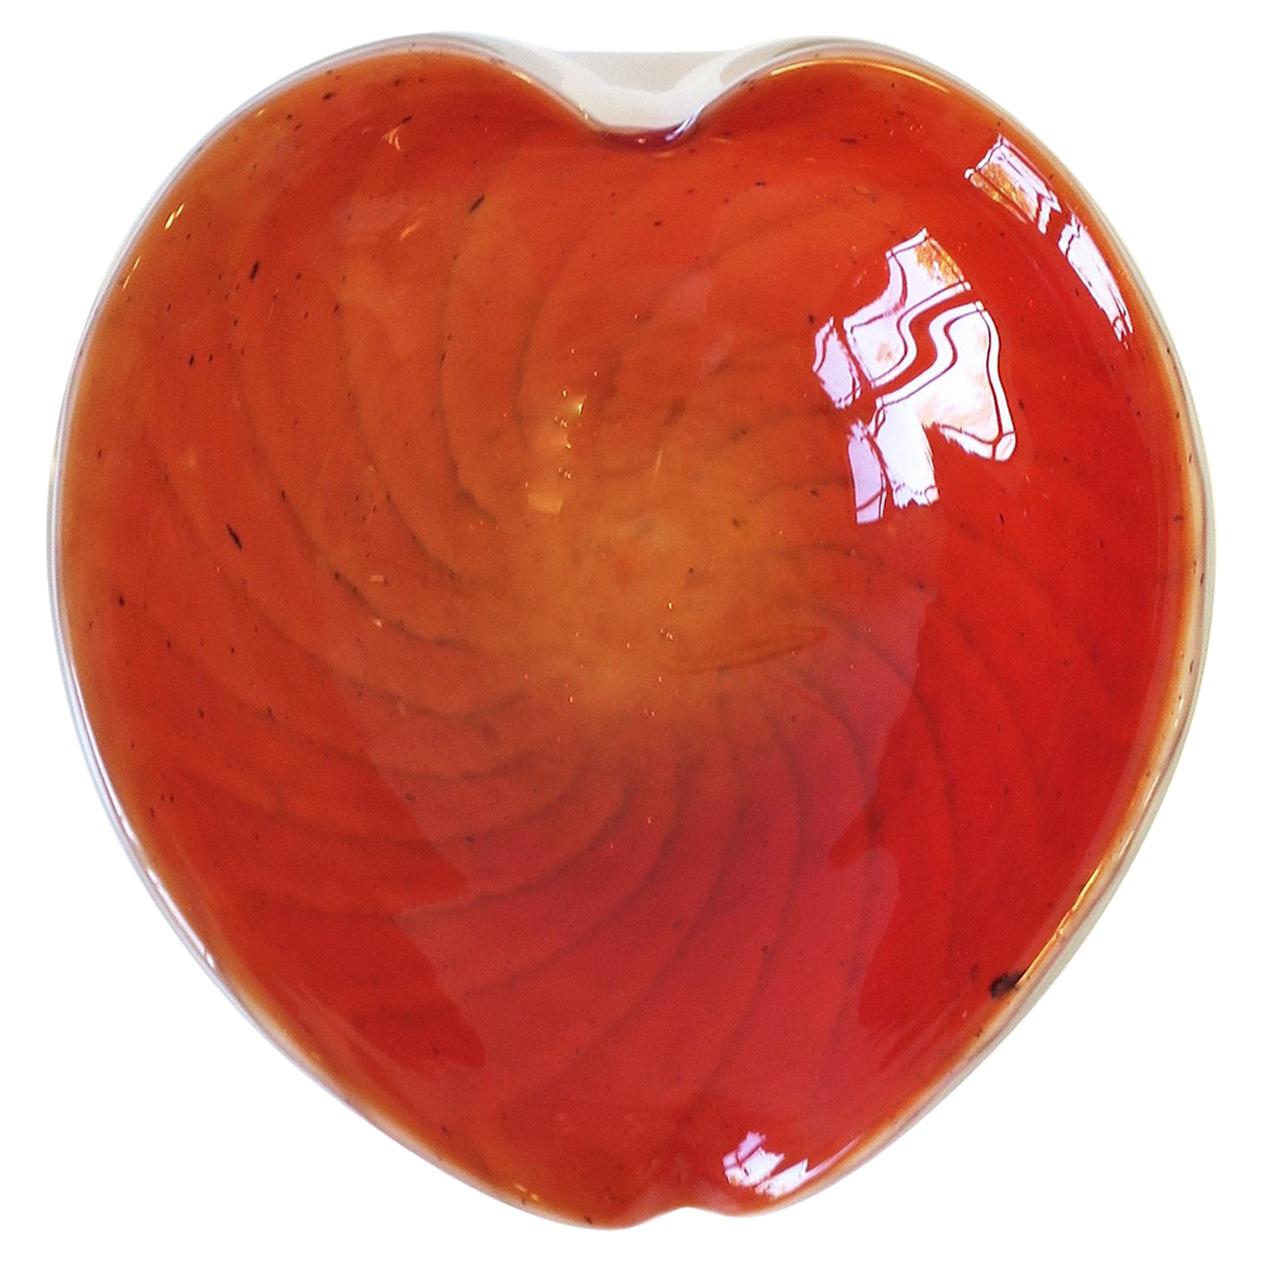 A beautiful vintage mid-20th century Italian Murano hand blown art glass bowl, Italy, circa 1960s. Bowl is white and orange art glass in a leaf form, an organic modern style. The white and orange glass is called 'incamicato'; a technique where two